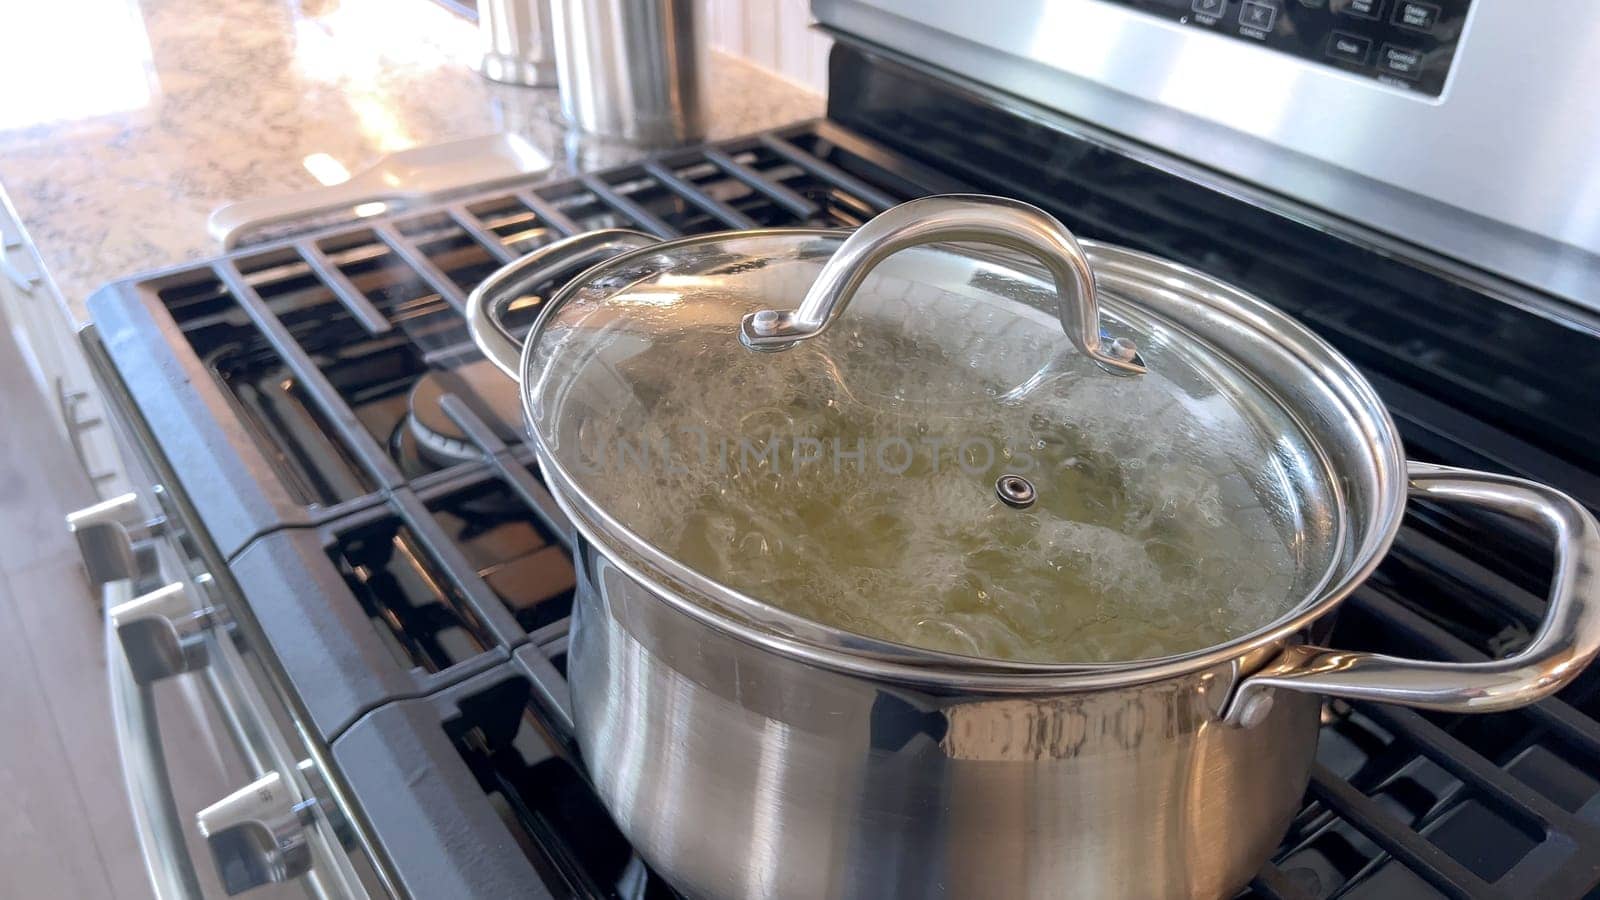 Cooking in Progress: Boiling Water in a Stainless Steel Pot on a Gas Stove by arinahabich